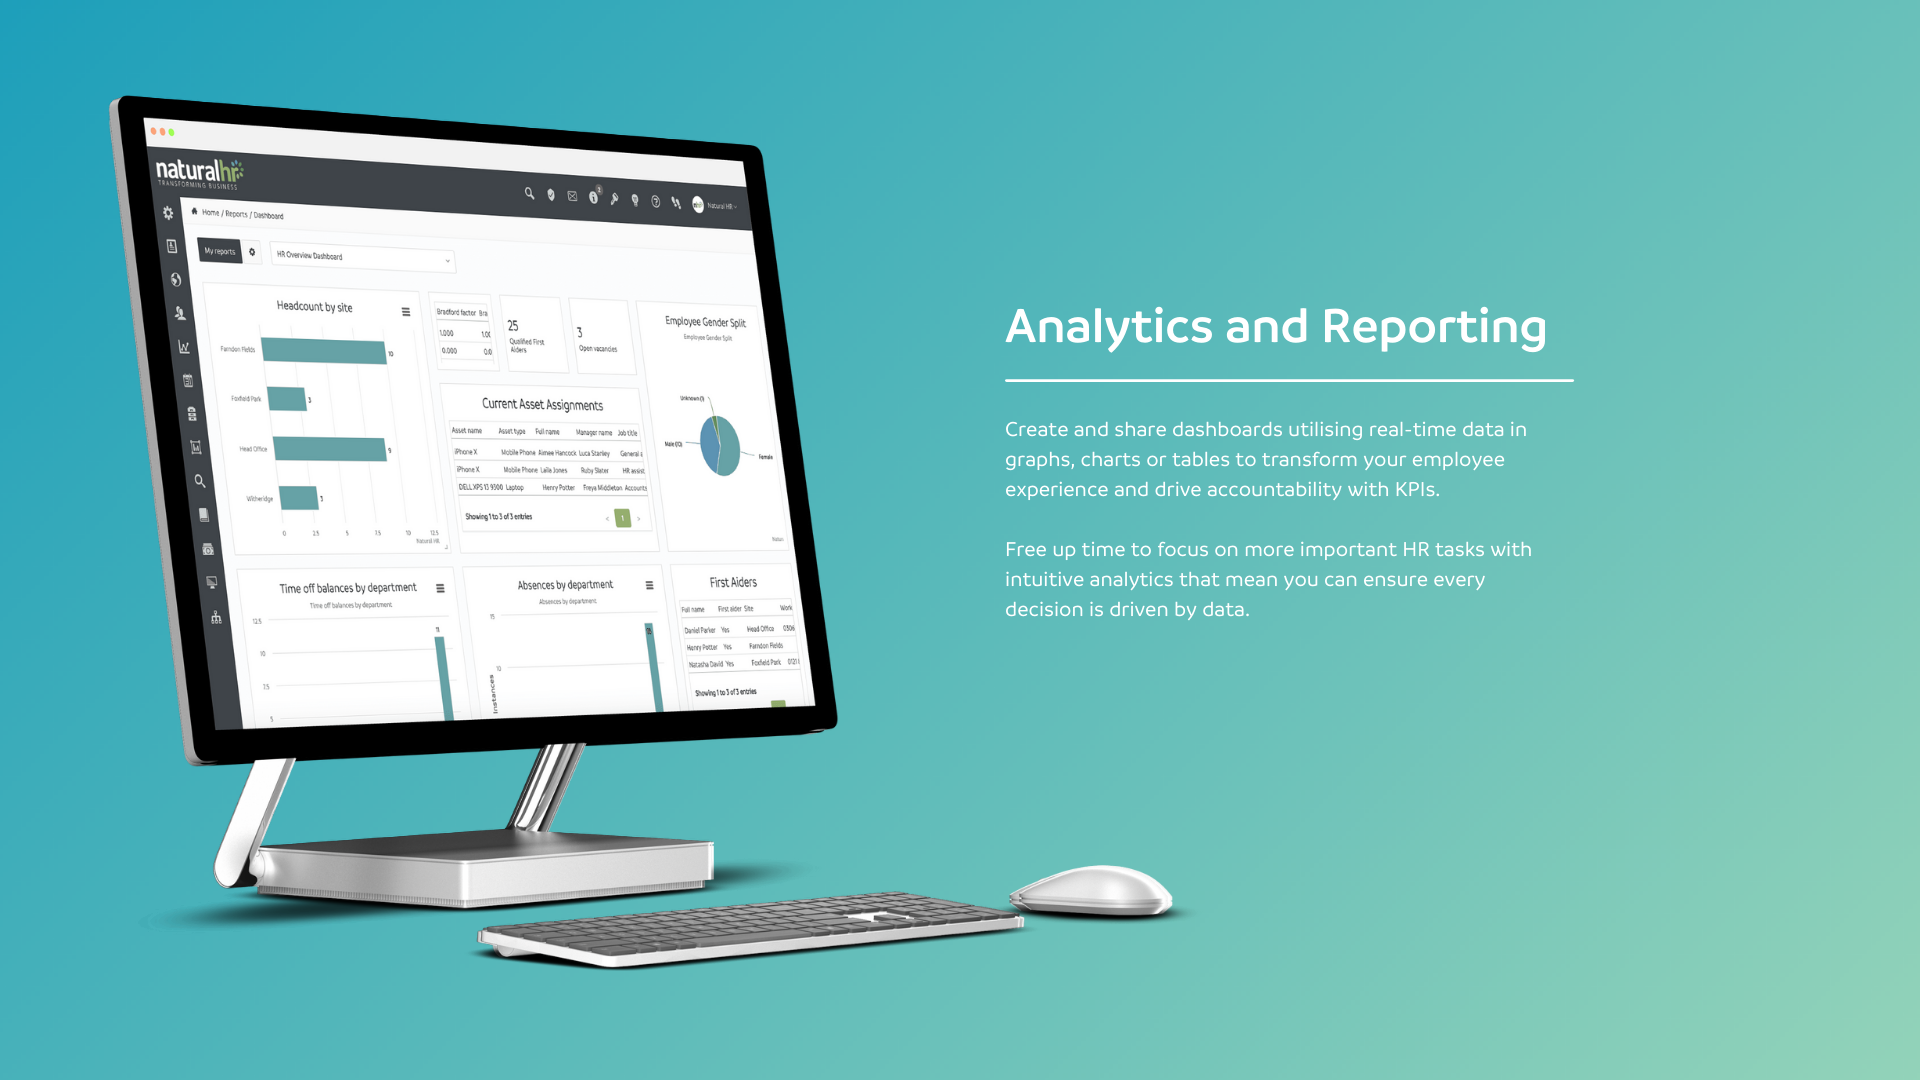 Natural HR Software - Create and share dashboards utilising real-time data in graphs, charts or tables to transform your employee experience and drive accountability with KPIs.